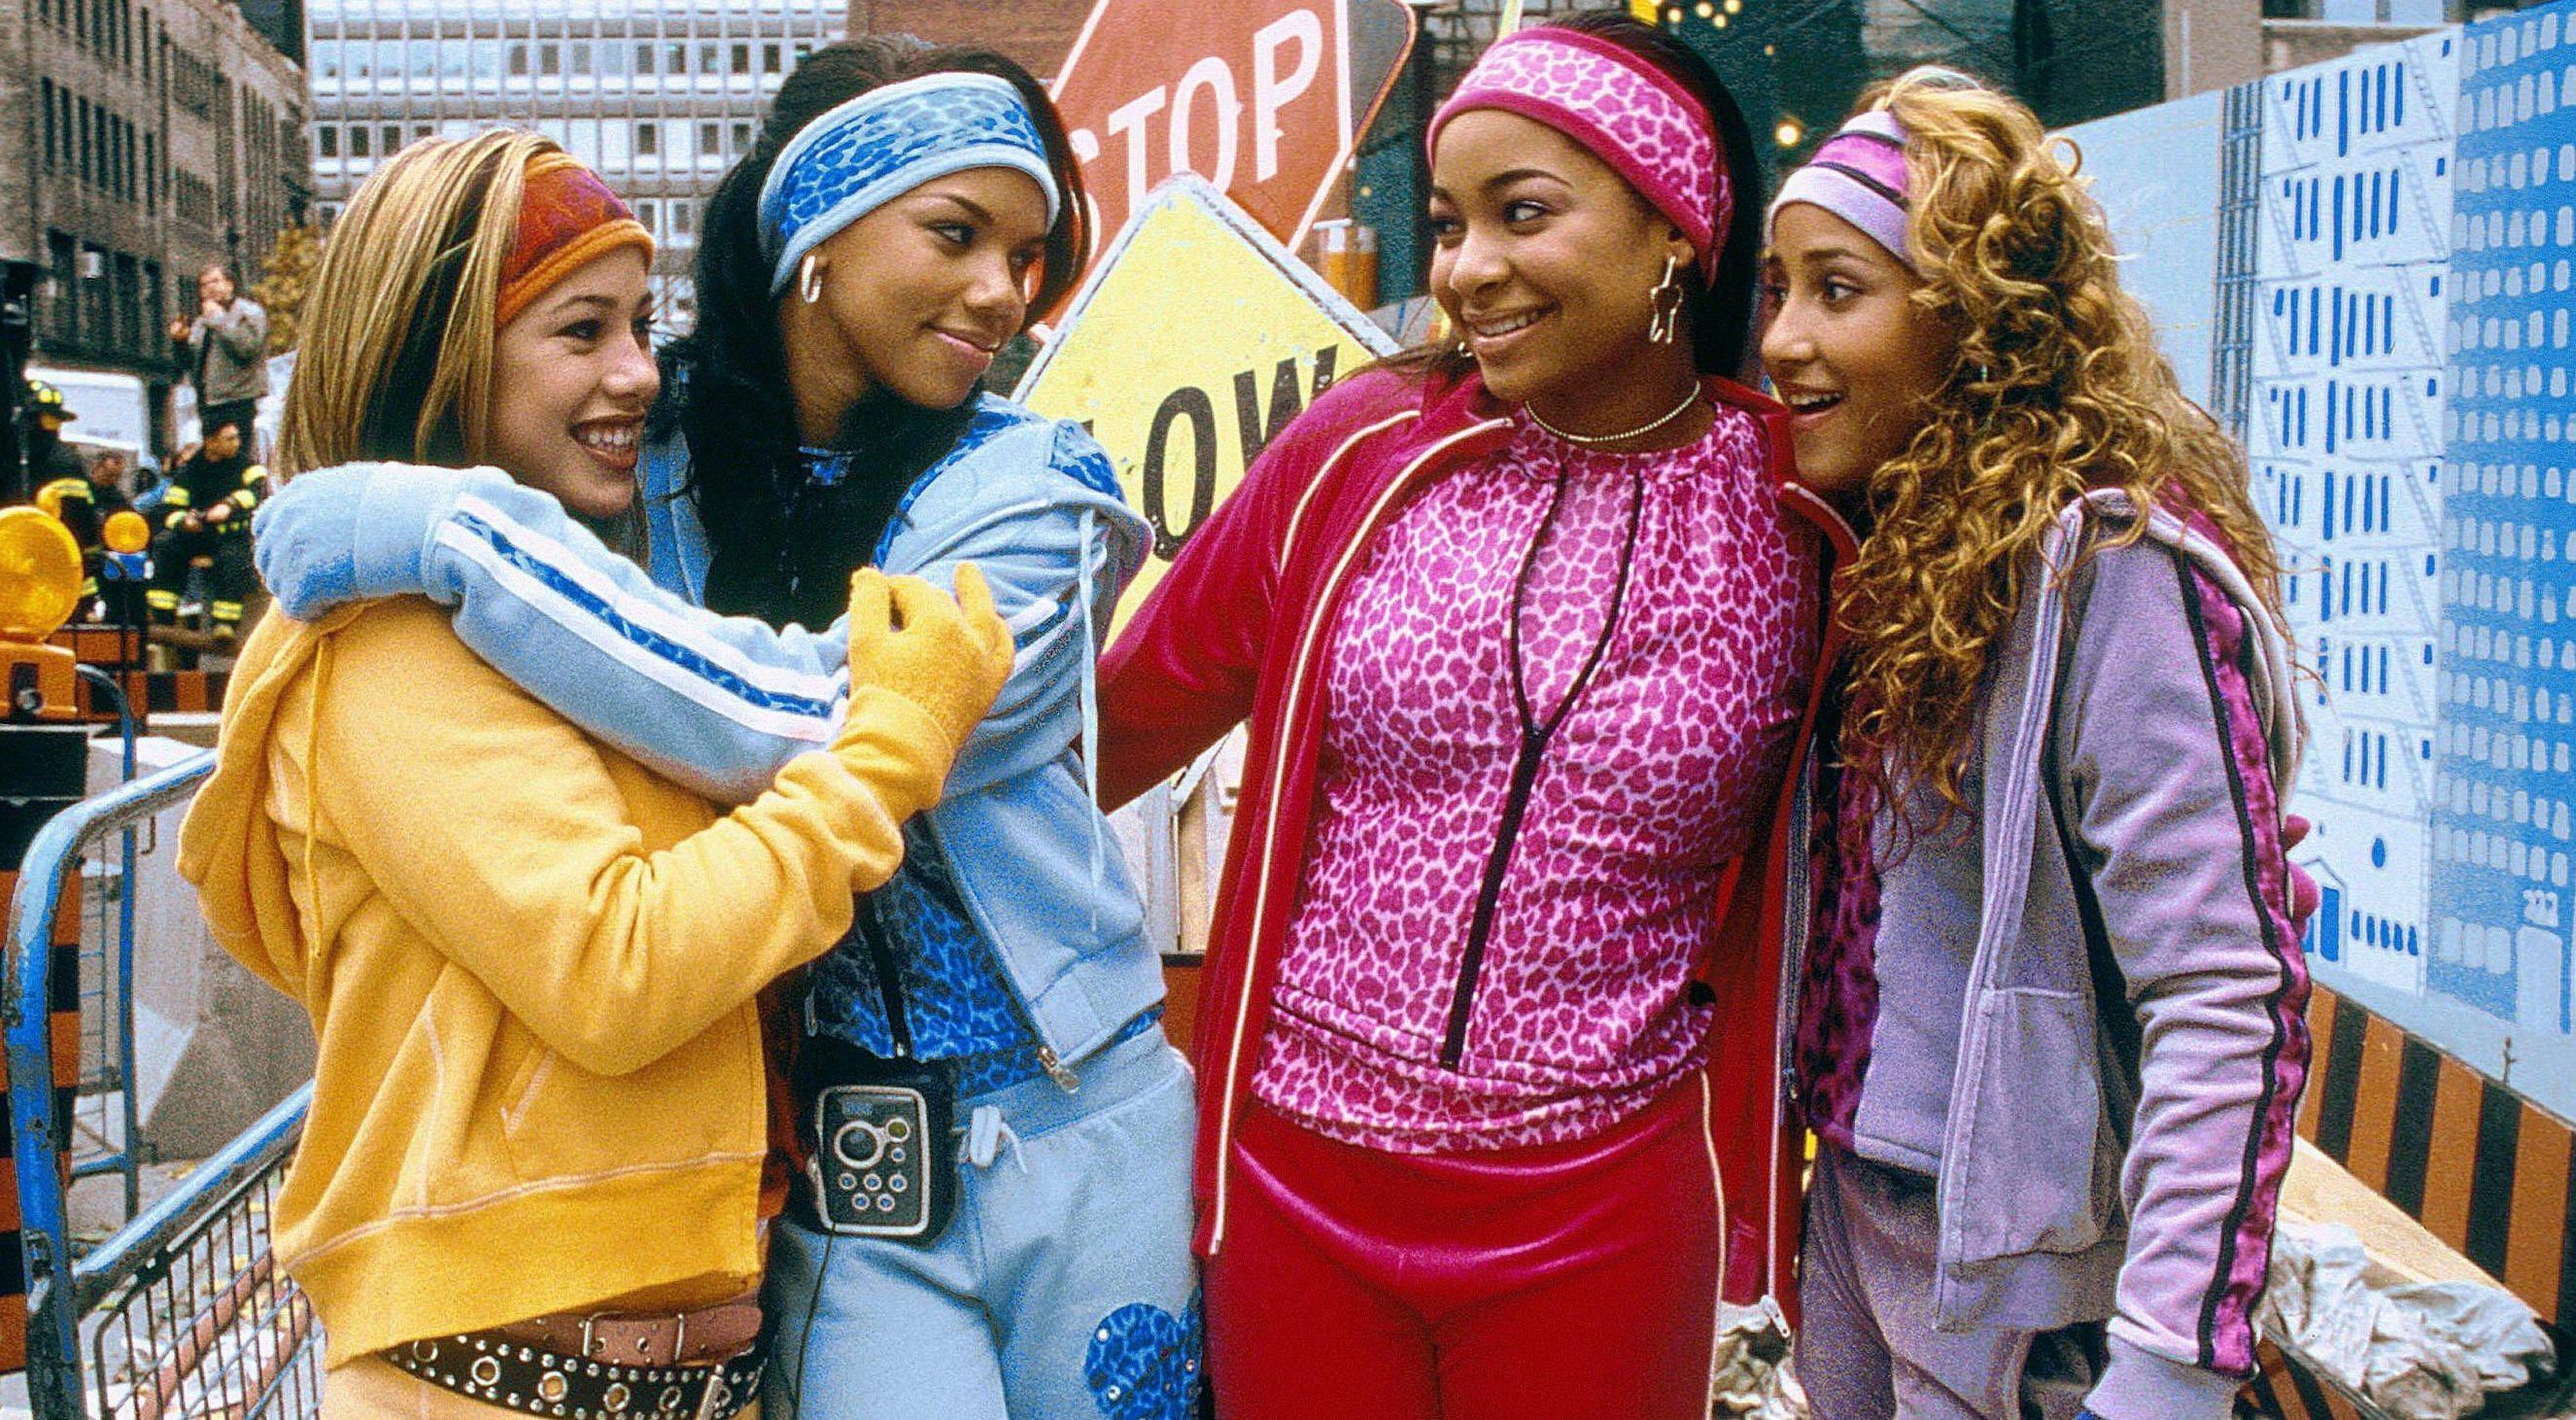 Raven Symone Just Hinted At A ‘Cheetah Girls’ Reunion, So It Really Is The Fkn Roaring 20s